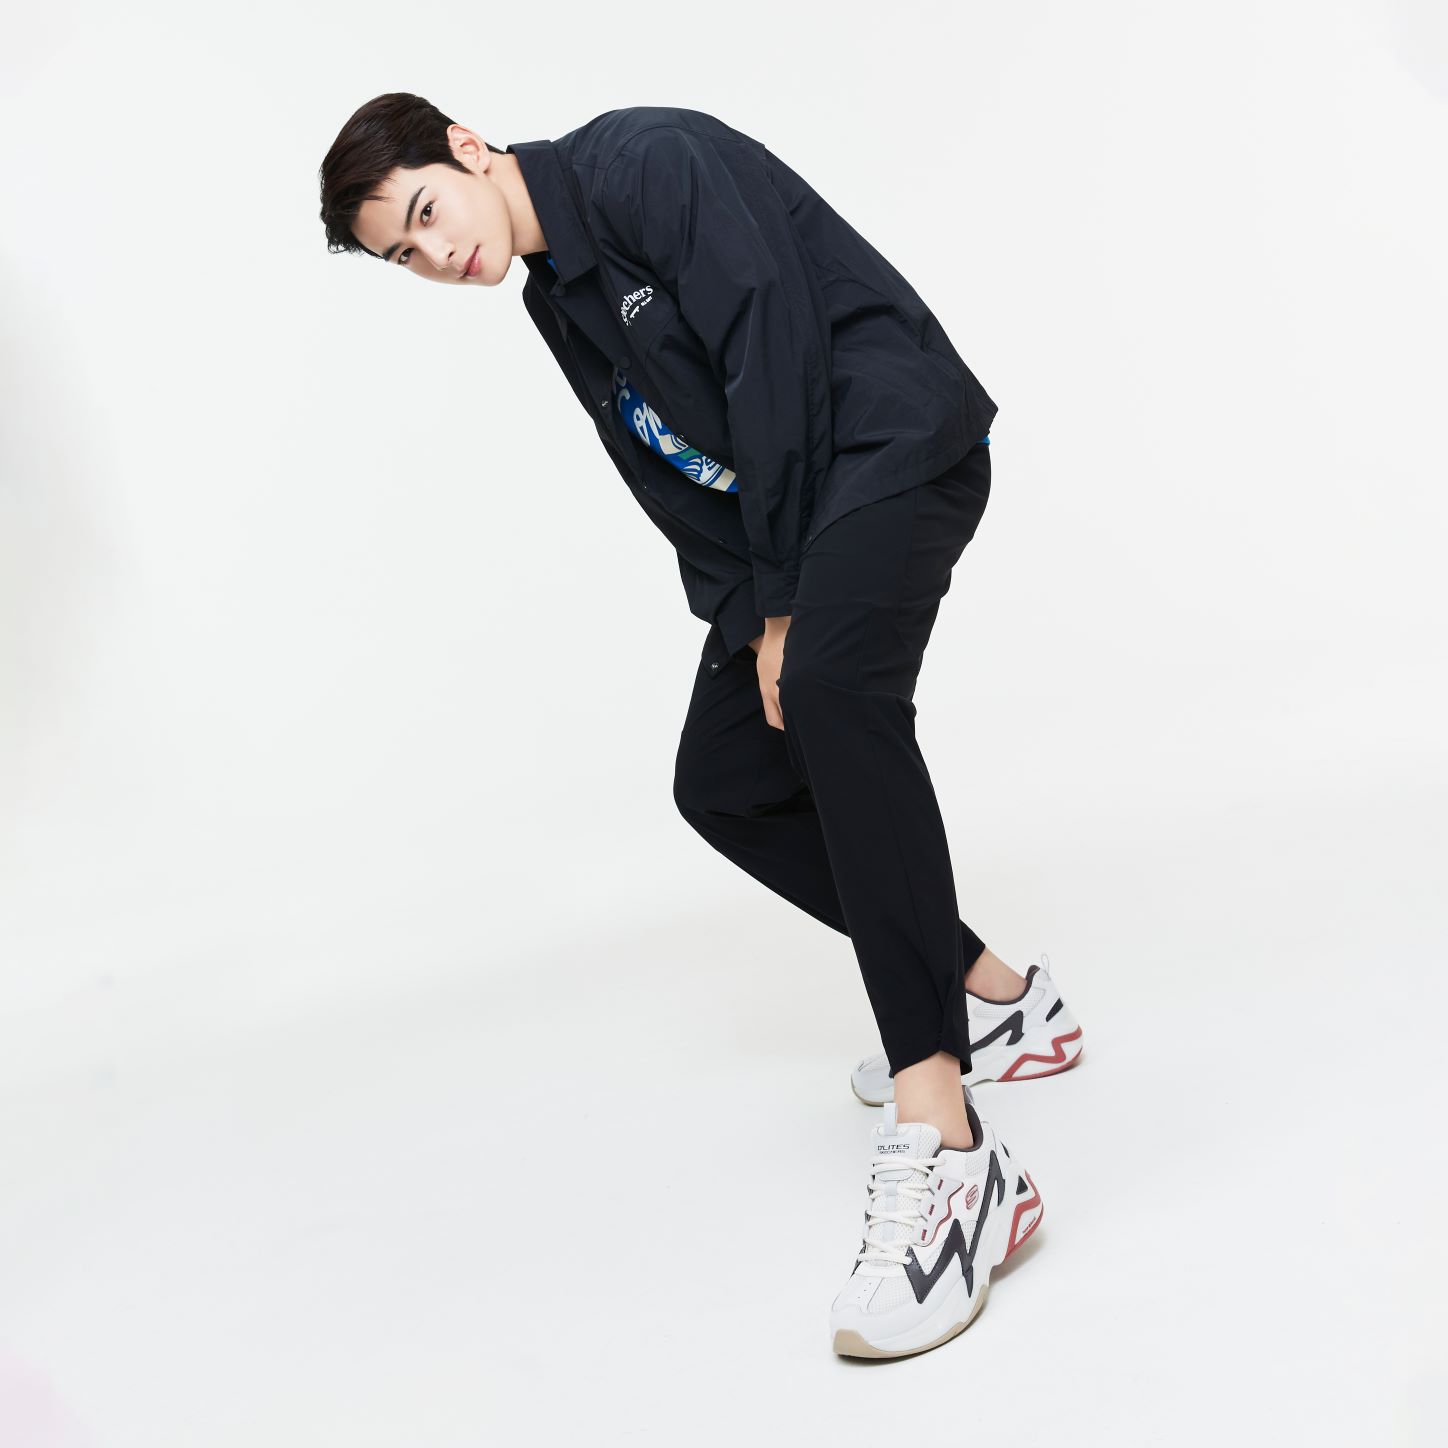 https://timessquare.com.hk/wp-content/uploads/2023/01/Cha-Eun-Woo-steps-out-in-the-brands-new-footwear-Skechers-DLites-HyperBurst-along-with-Skechers-Apparel%E8%BB%8A%E9%8A%80%E5%84%AA%E7%A9%BF%E4%B8%8A%E5%93%81%E7%89%8C%E6%96%B0%E8%A3%9D%E5%8F%8ASkechers-DLites-HyperBurst_1.jpg